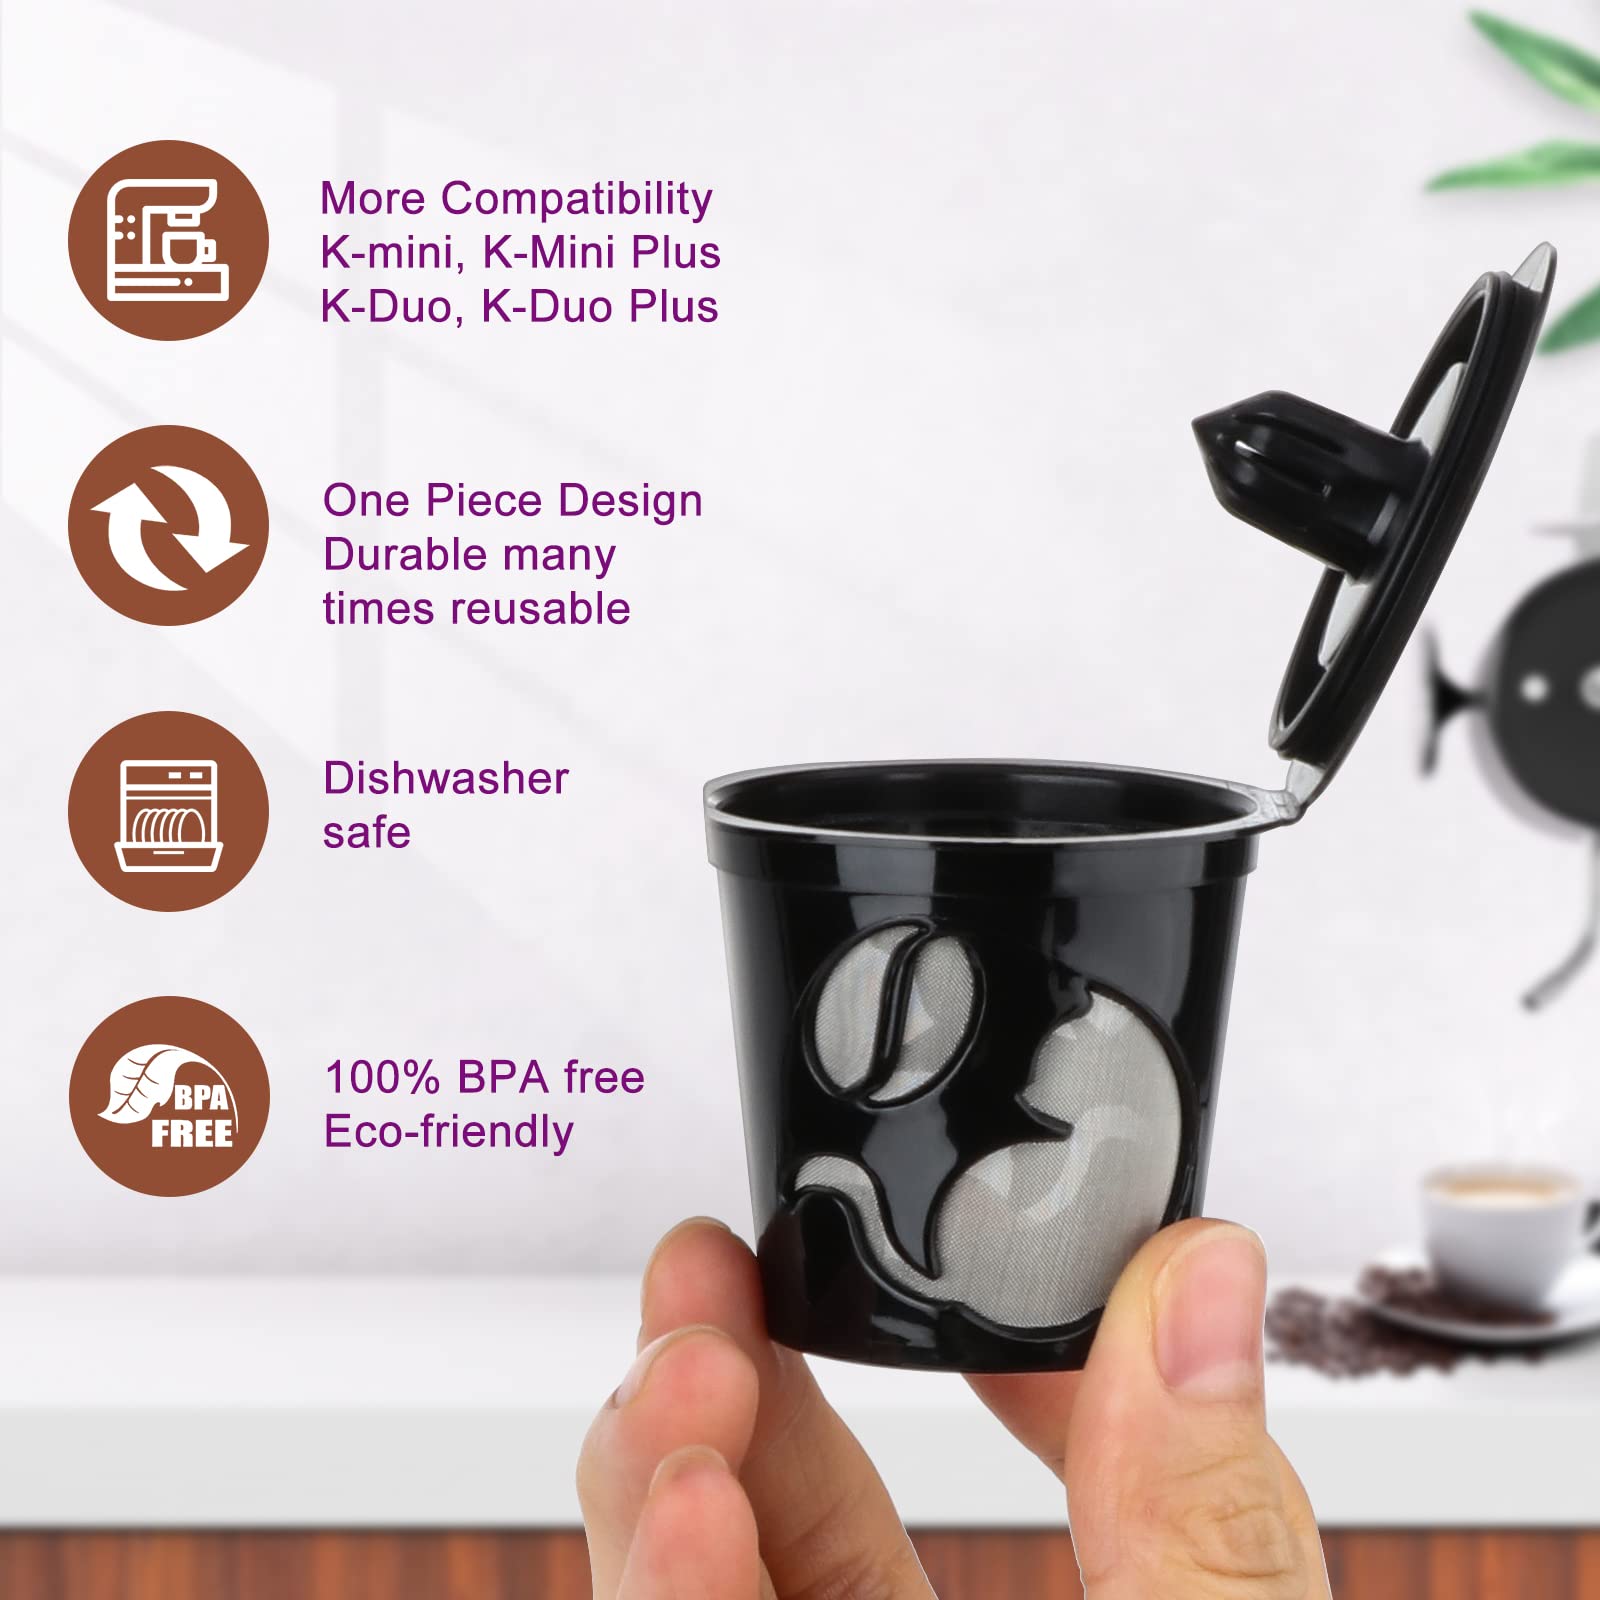 Reusable K Cups for K-Mini/K-Duo, 4 Pack Reusable Coffee Filters Pods for Keurig, BPA Free Refillable Single K Cups for Keurig K-Mini, K-Duo, 1.0 & 2.0 Series…